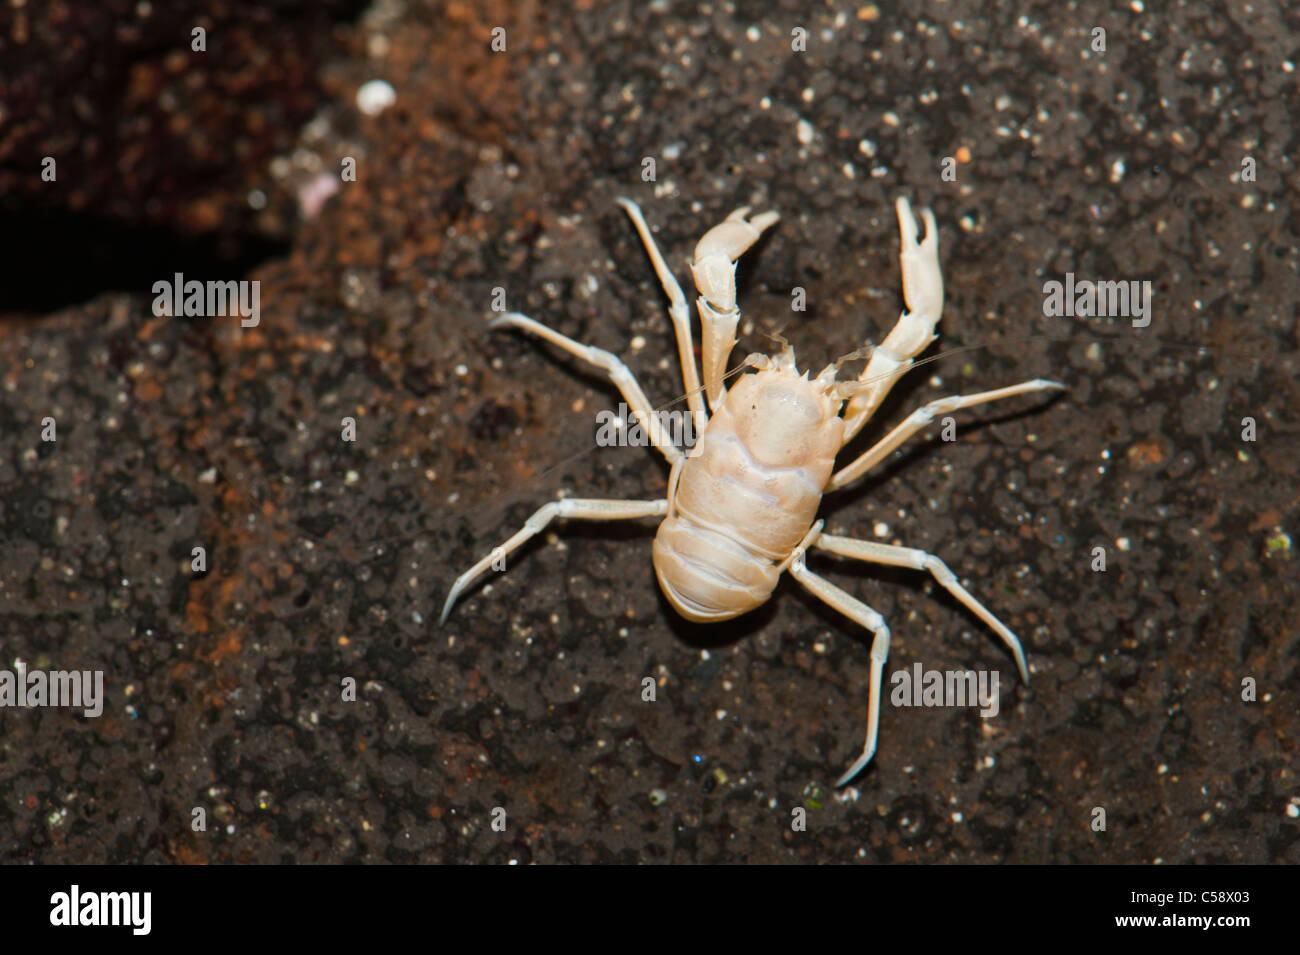 Munidopsis polymorpha (nicknamed 'jameíto'), a small albino blind crab endemic from the Jameos del Agua cave, Lanzarote, Canary Islands, Spain Stock Photo